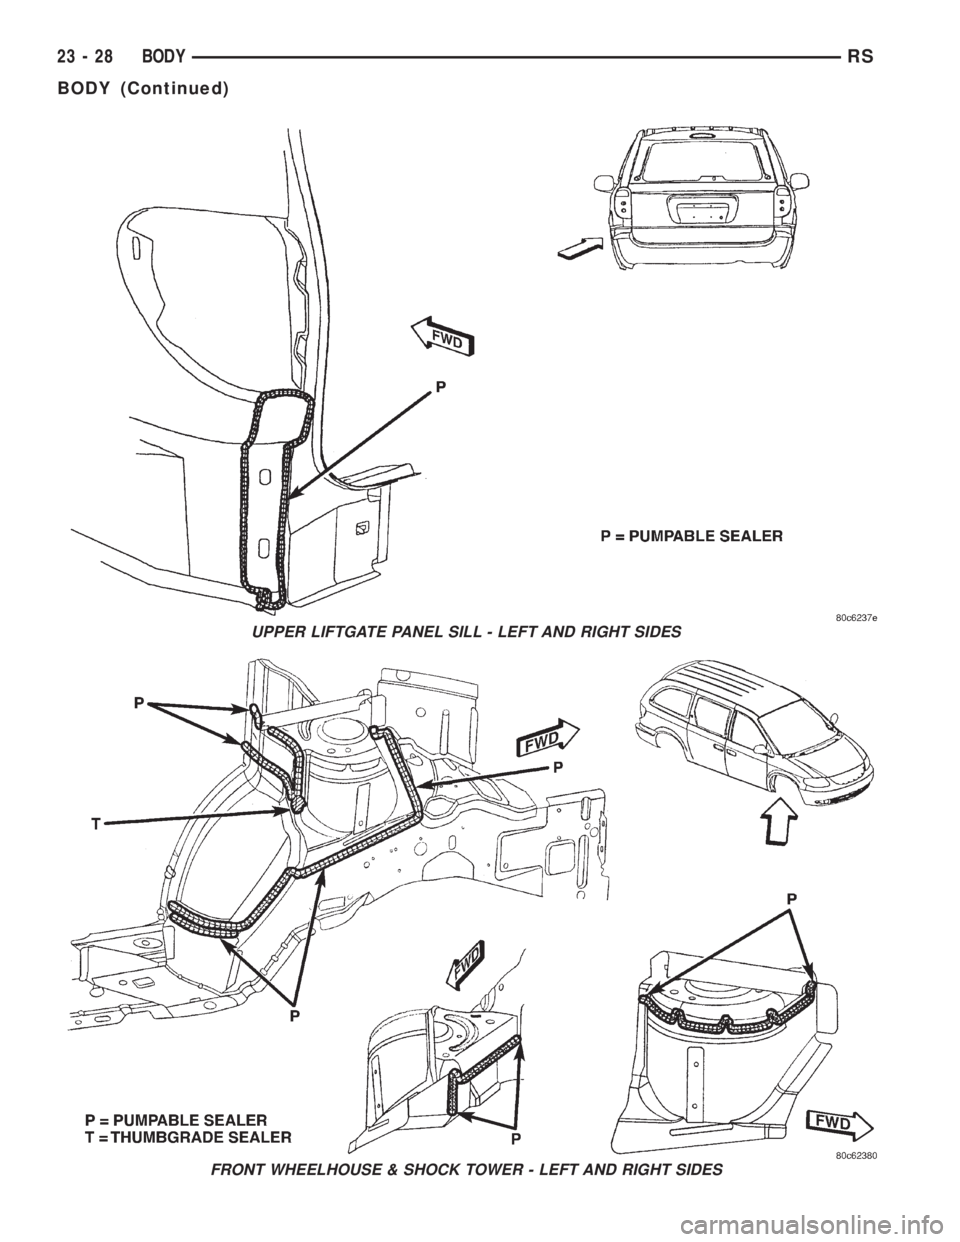 CHRYSLER VOYAGER 2001  Service Manual UPPER LIFTGATE PANEL SILL - LEFT AND RIGHT SIDES
FRONT WHEELHOUSE & SHOCK TOWER - LEFT AND RIGHT SIDES
23 - 28 BODYRS
BODY (Continued) 